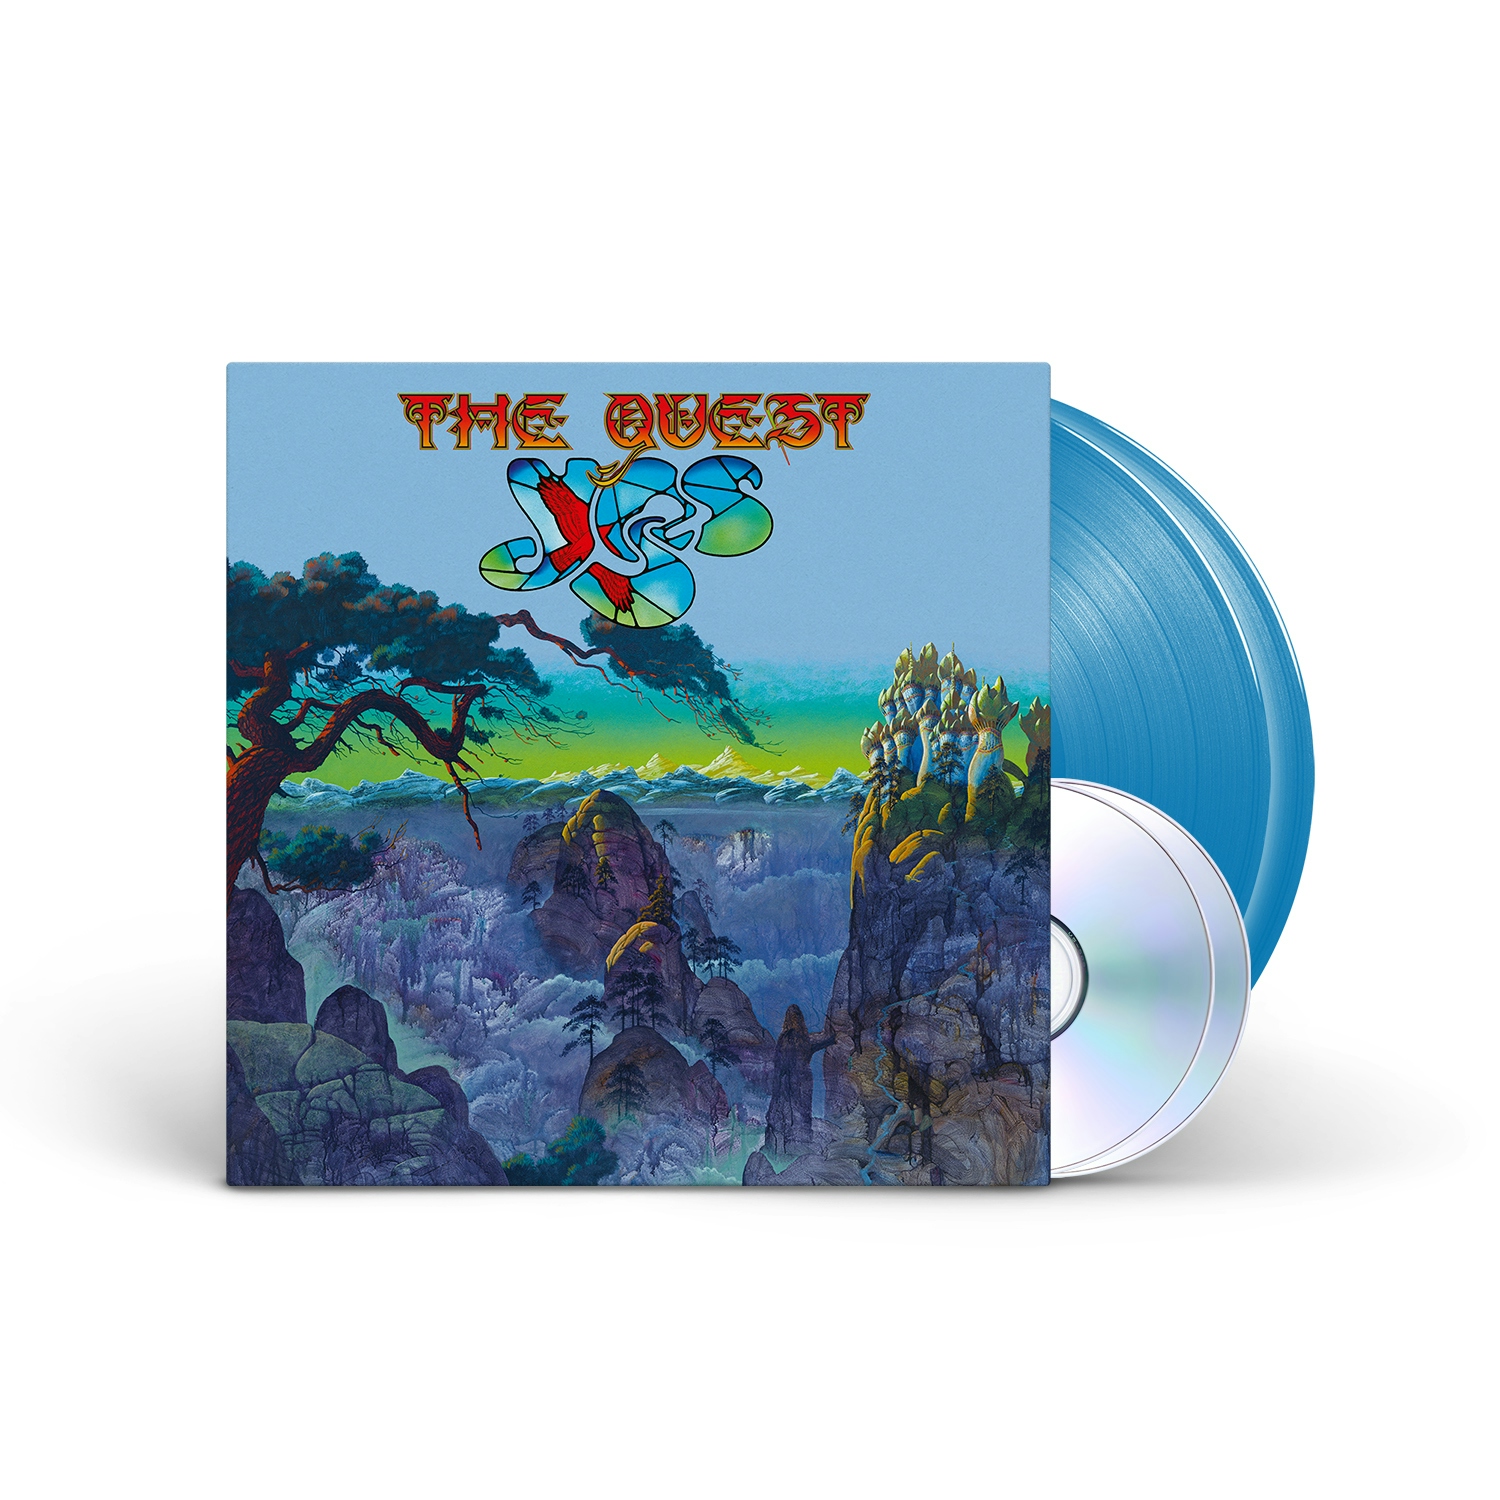 Album artwork for The Quest by Yes